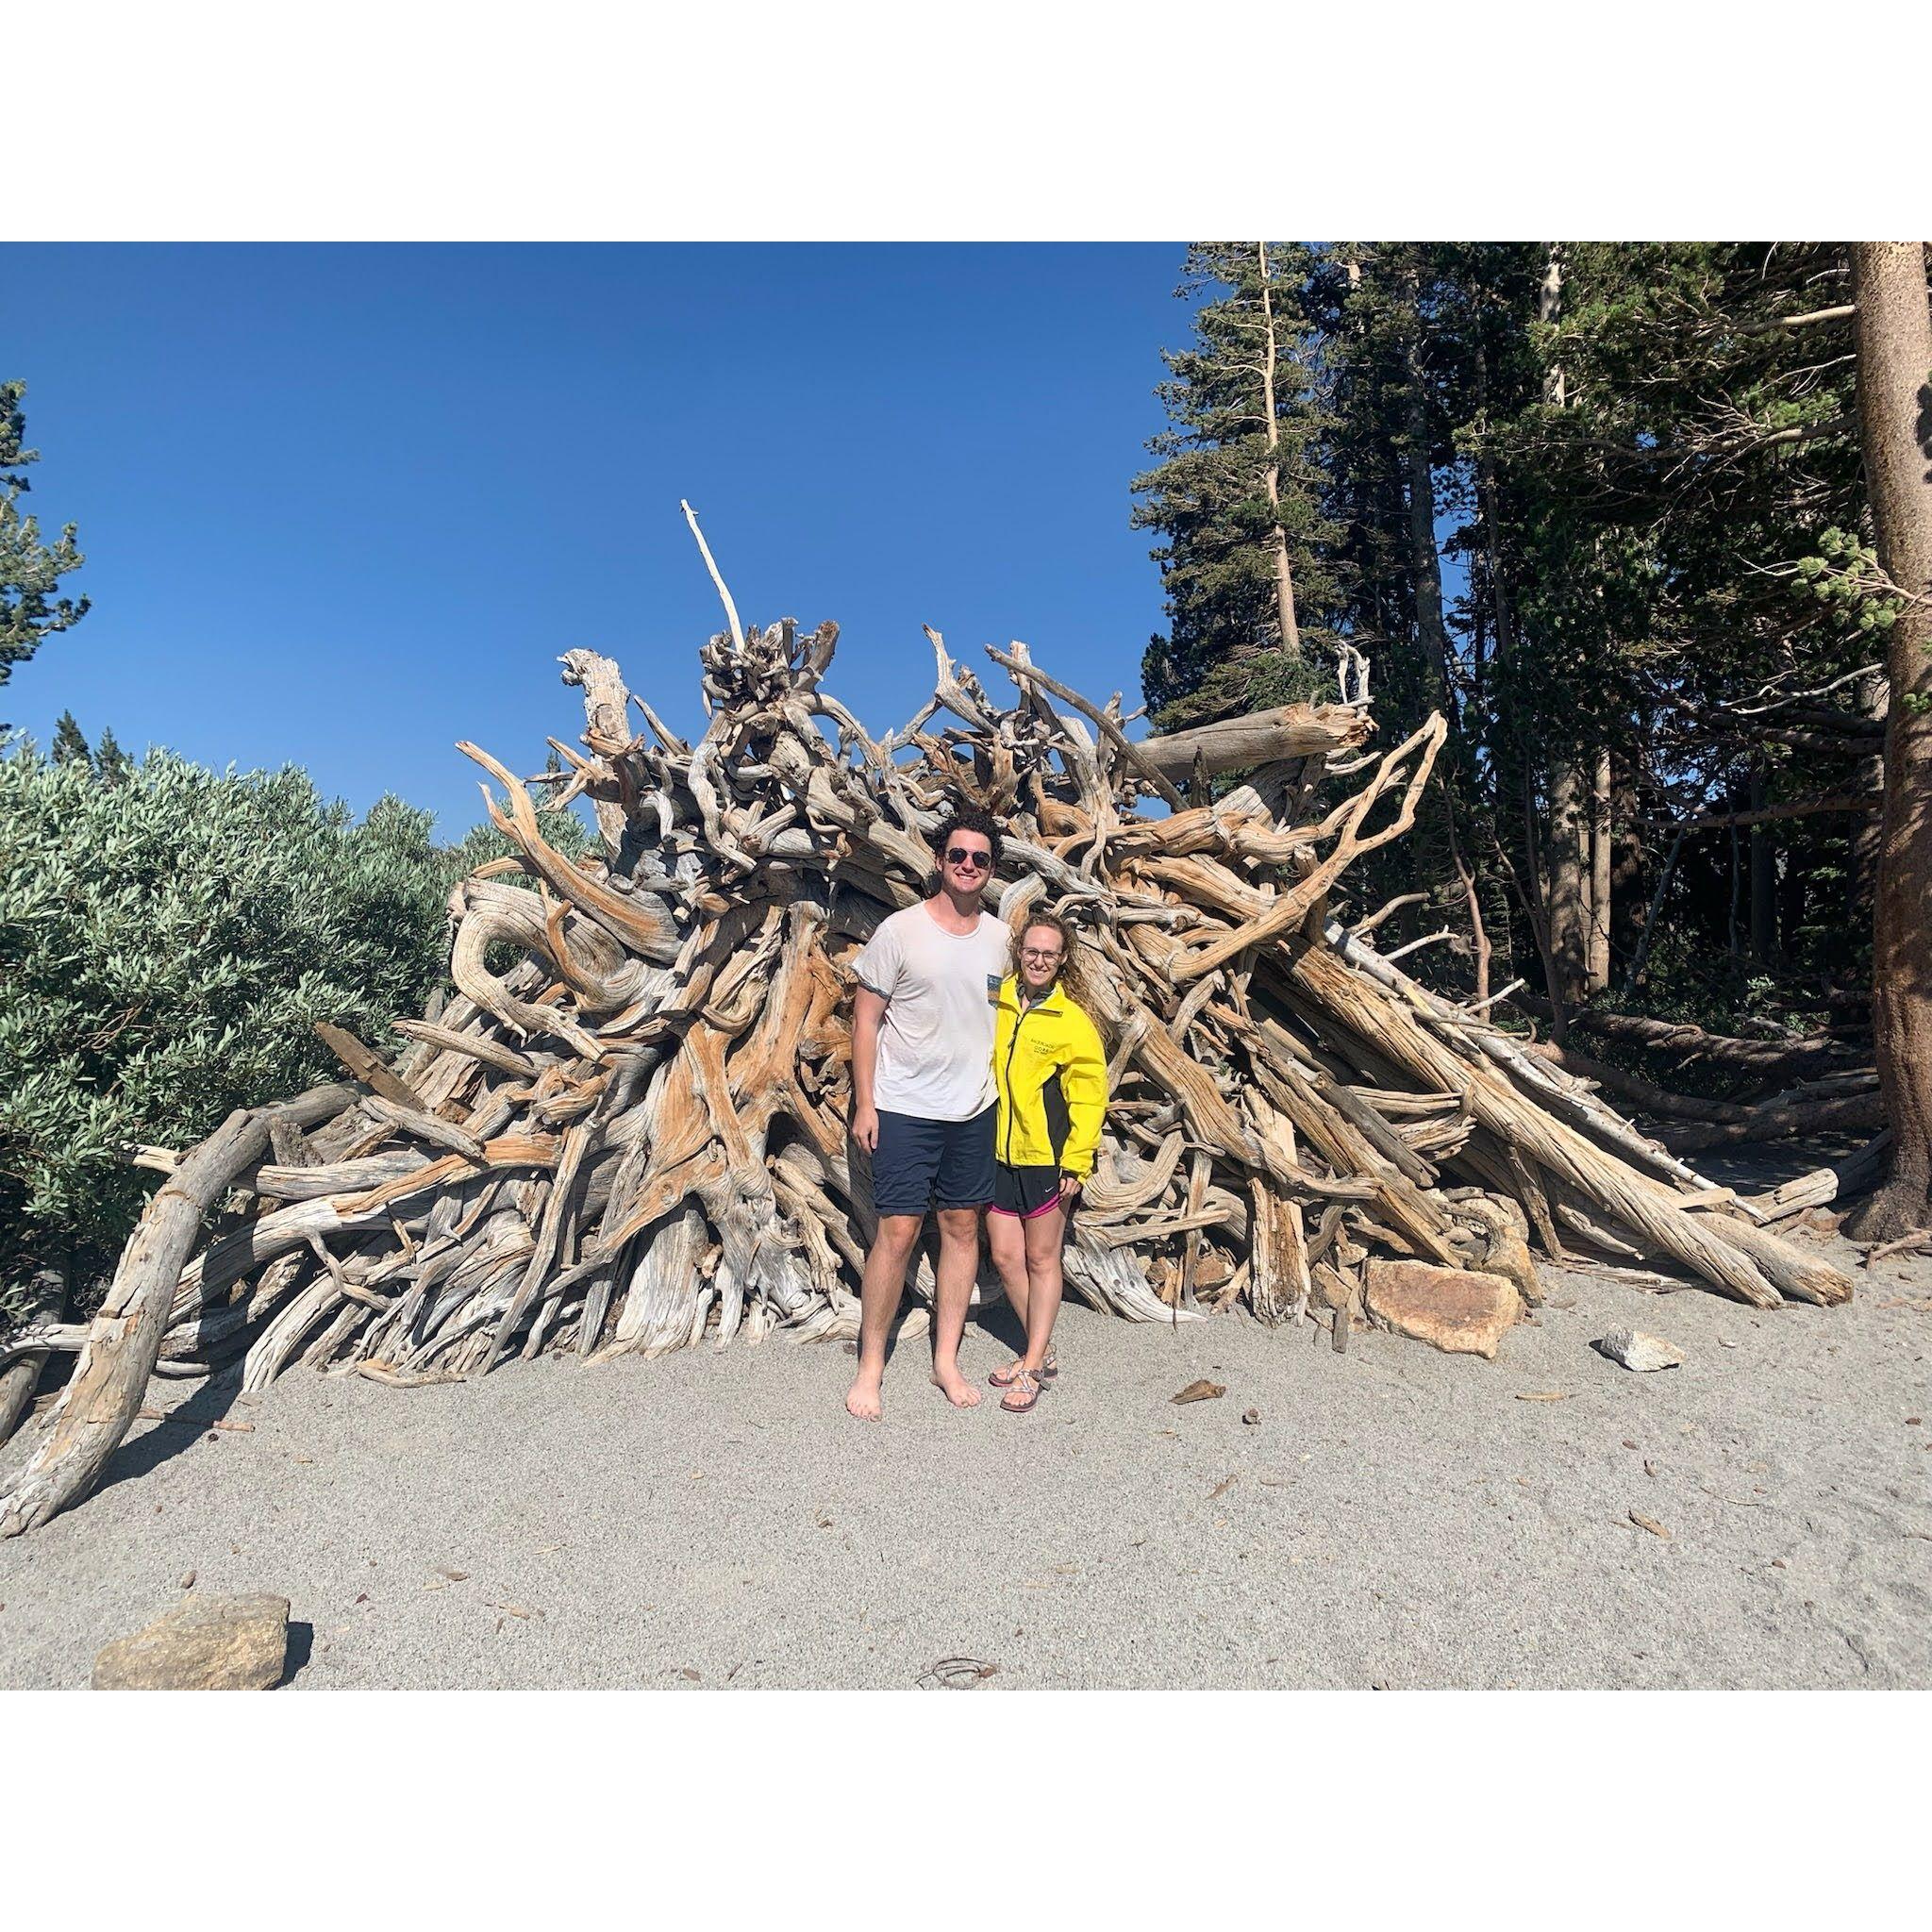 During our Mammoth adventures, we stumbled upon a cool wooden treasure...